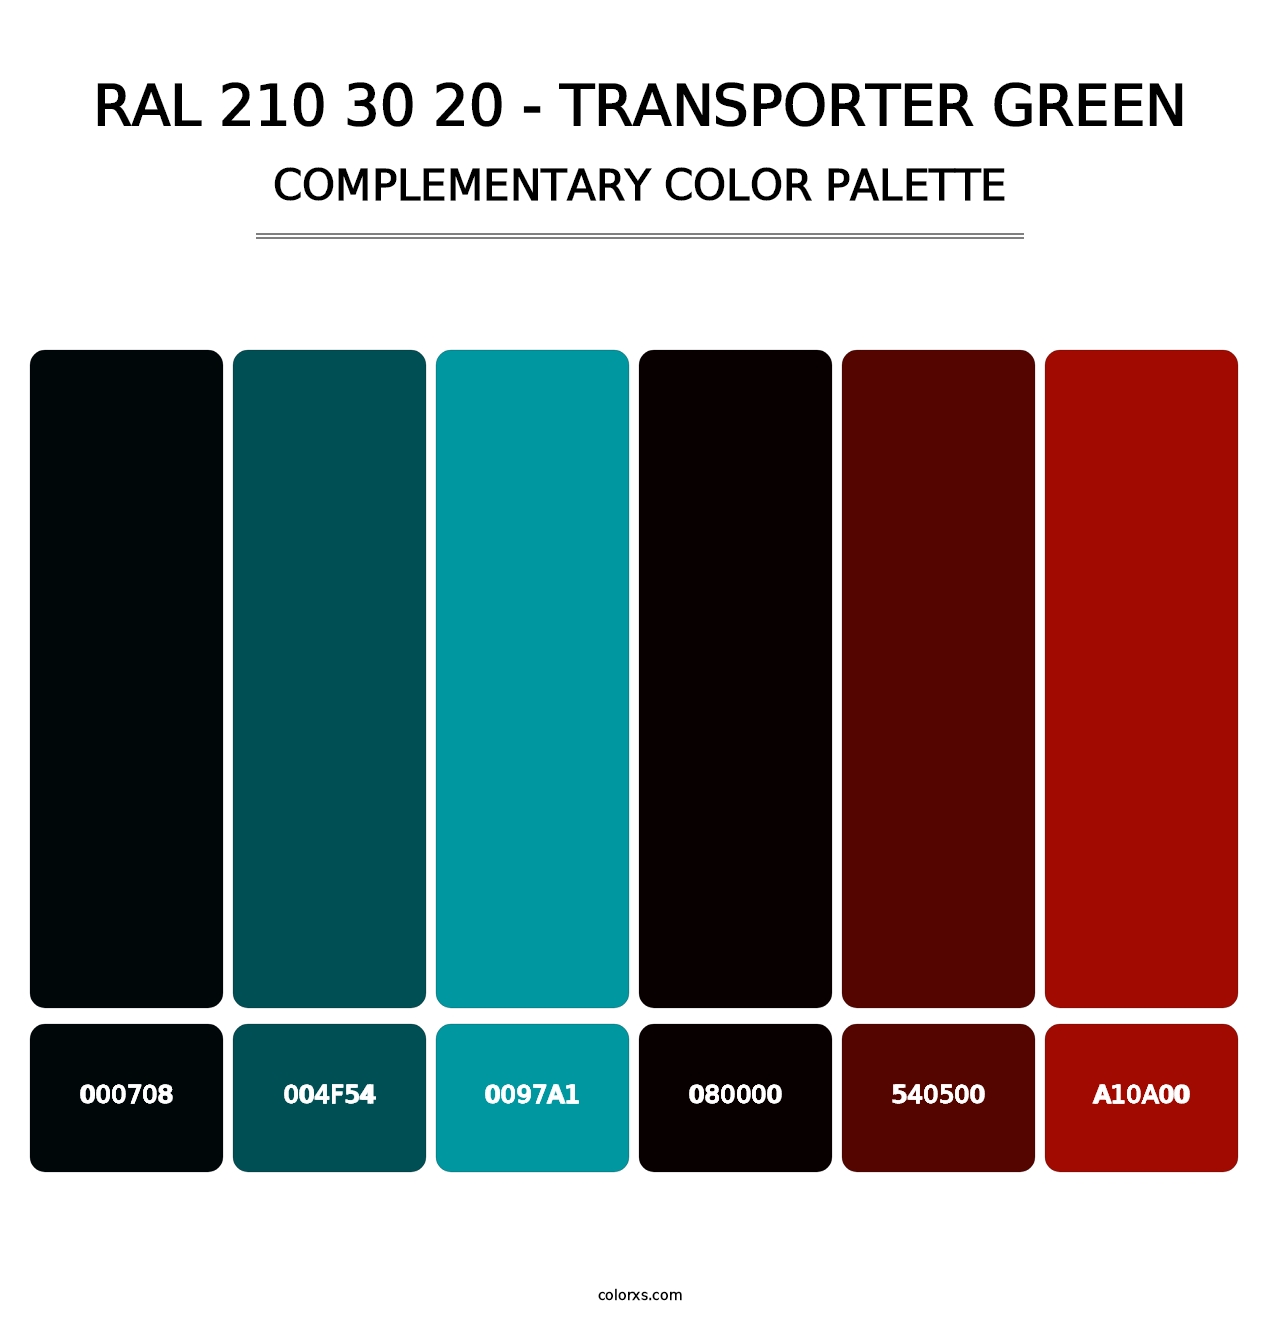 RAL 210 30 20 - Transporter Green - Complementary Color Palette